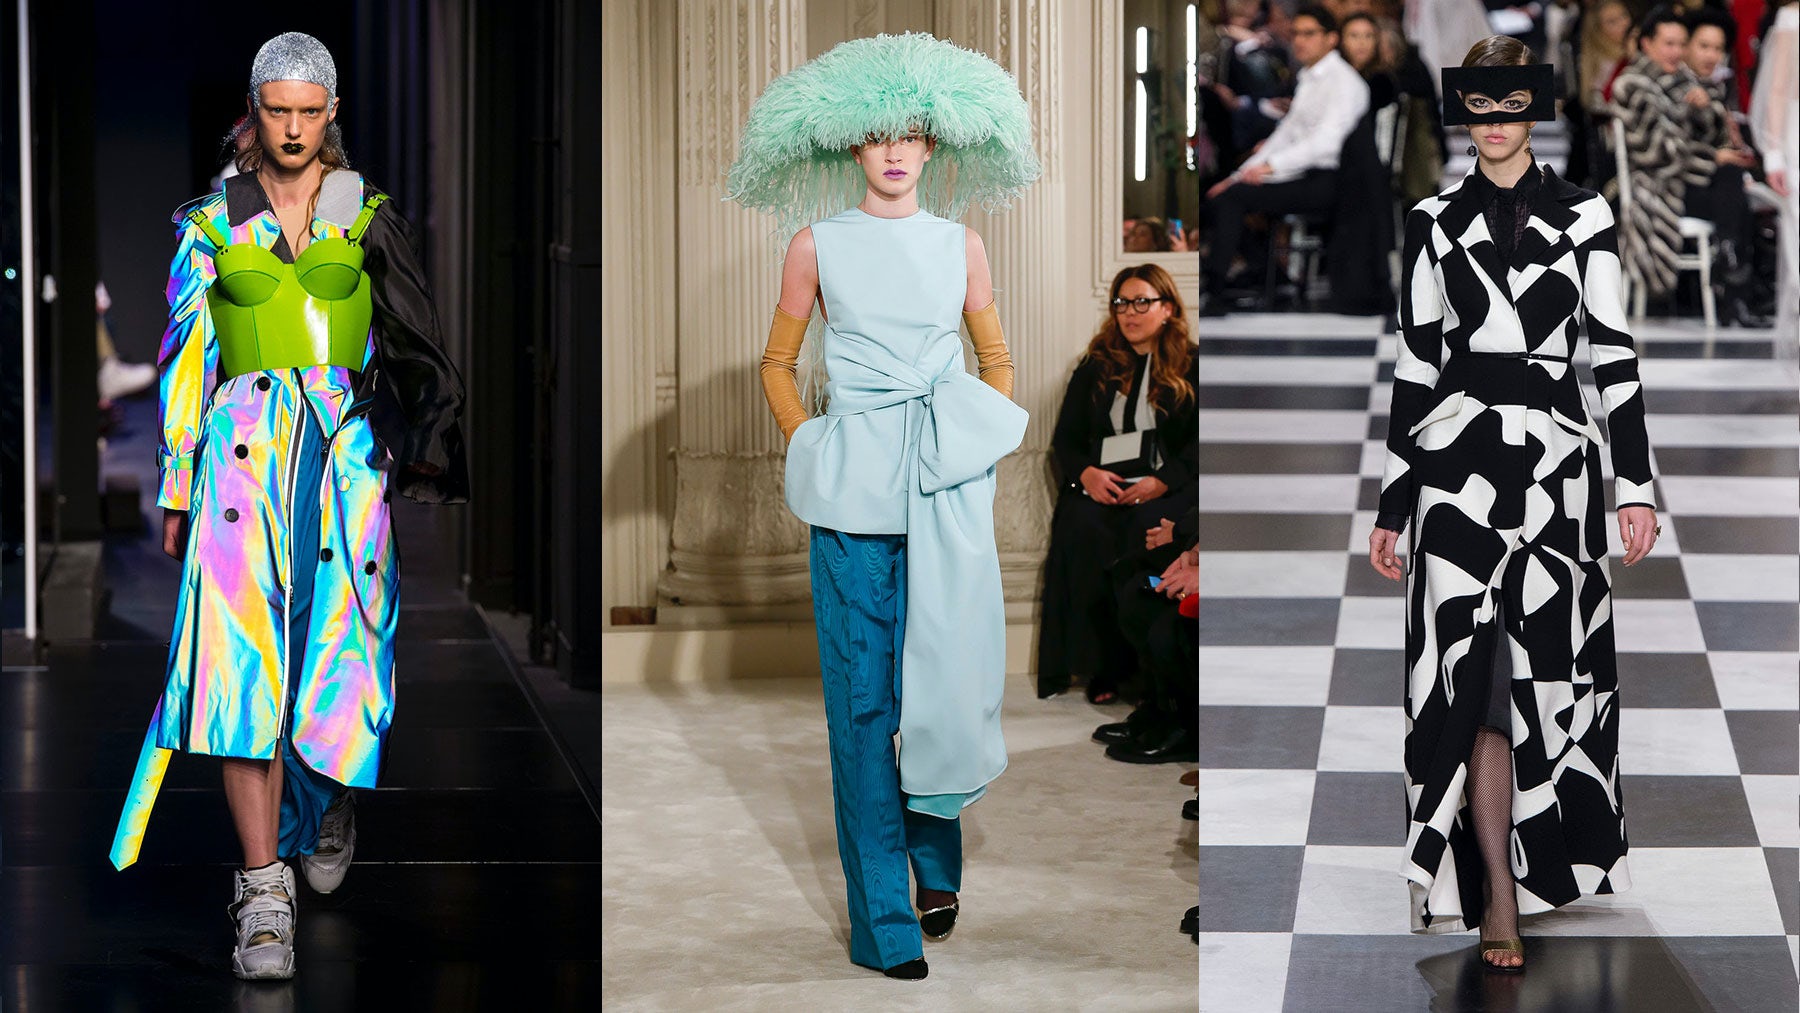 Can Couture Be Contemporary?